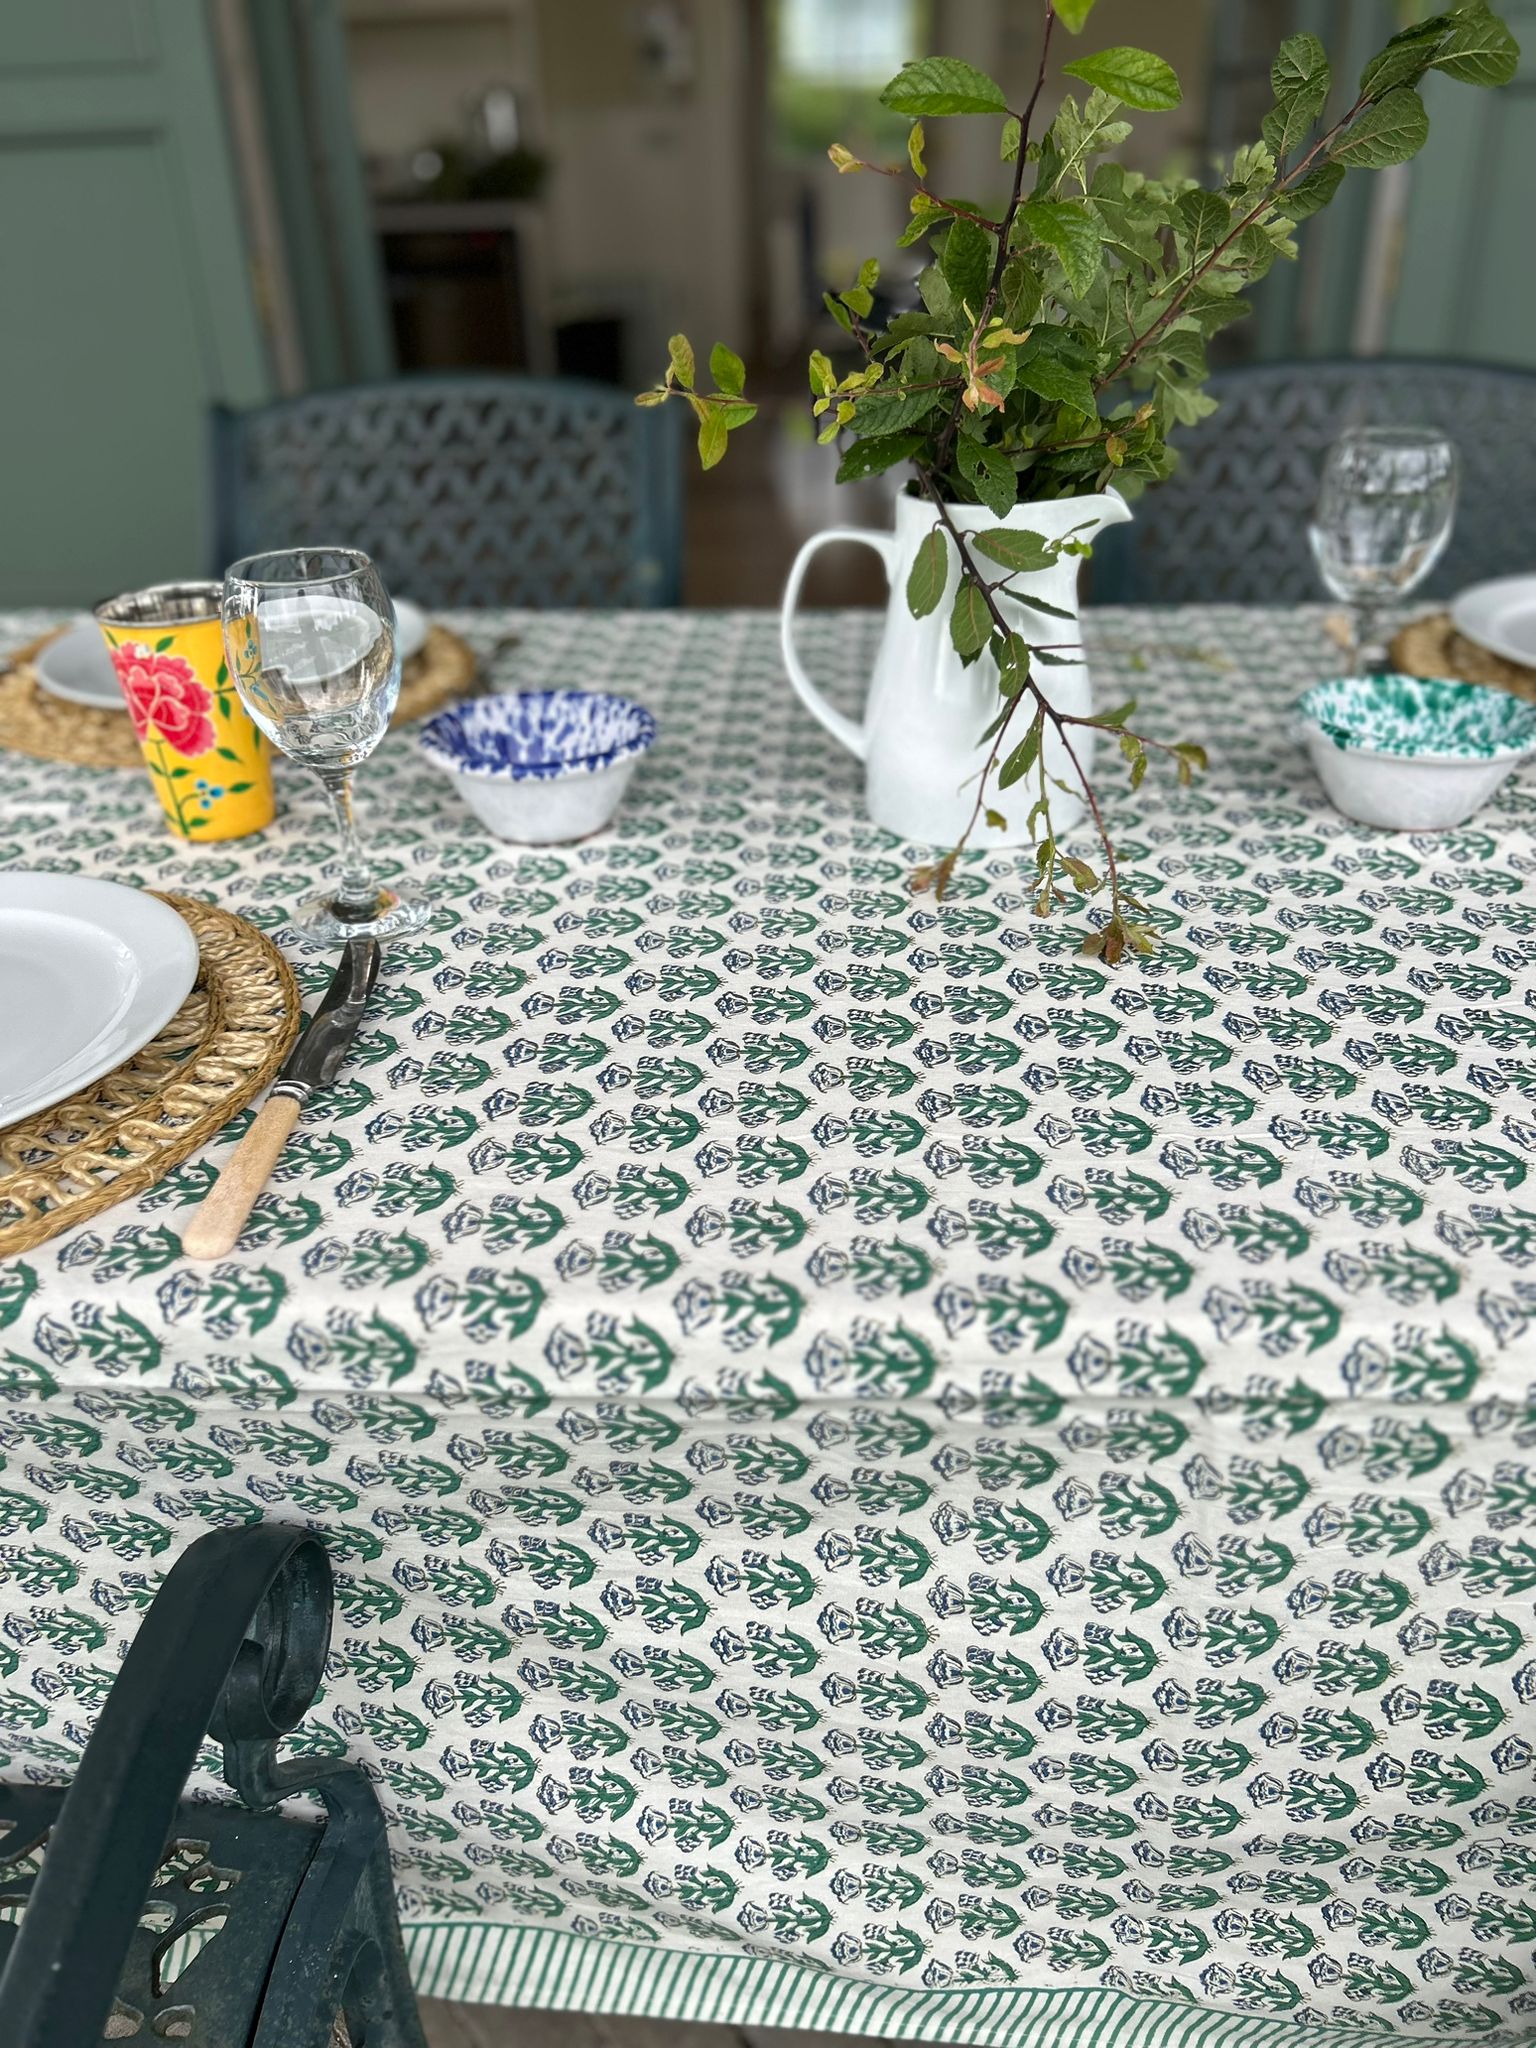 Block Printed tablecloths green and blue floral